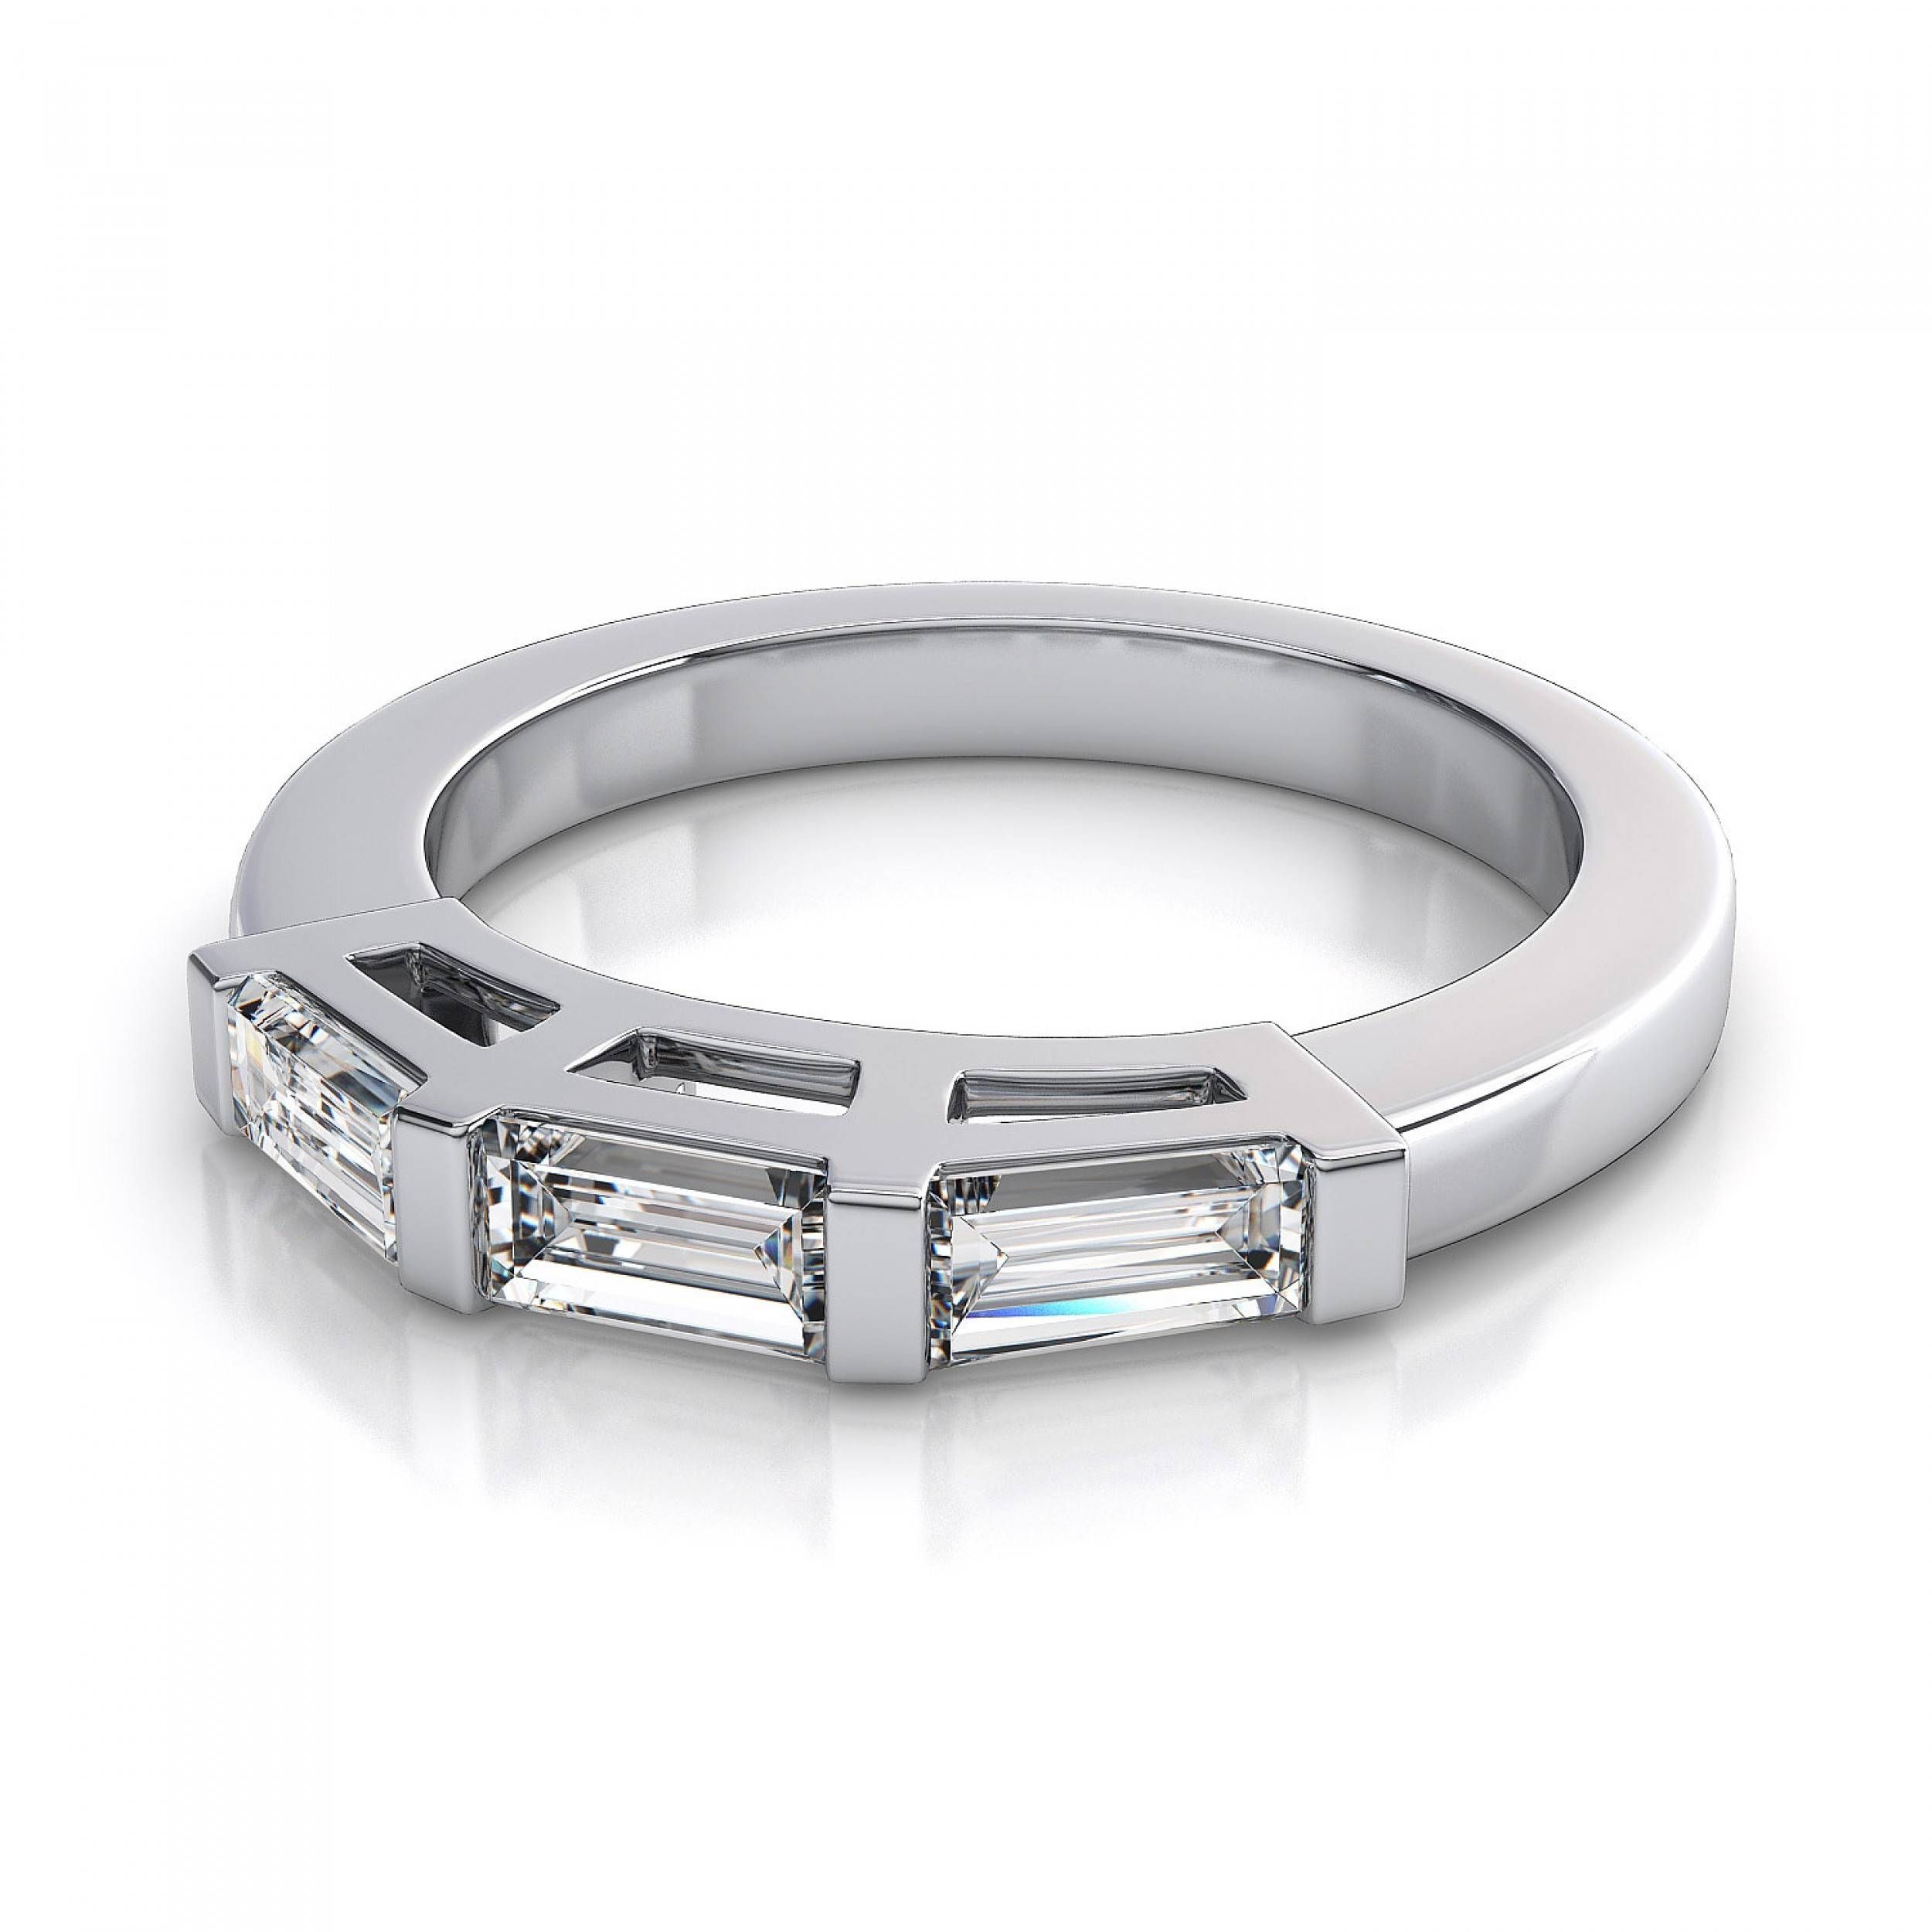 Ctw Bar Set Baguette Diamond Wedding Band In 14k White Gold Regarding Wedding Bands With Baguettes (View 1 of 15)